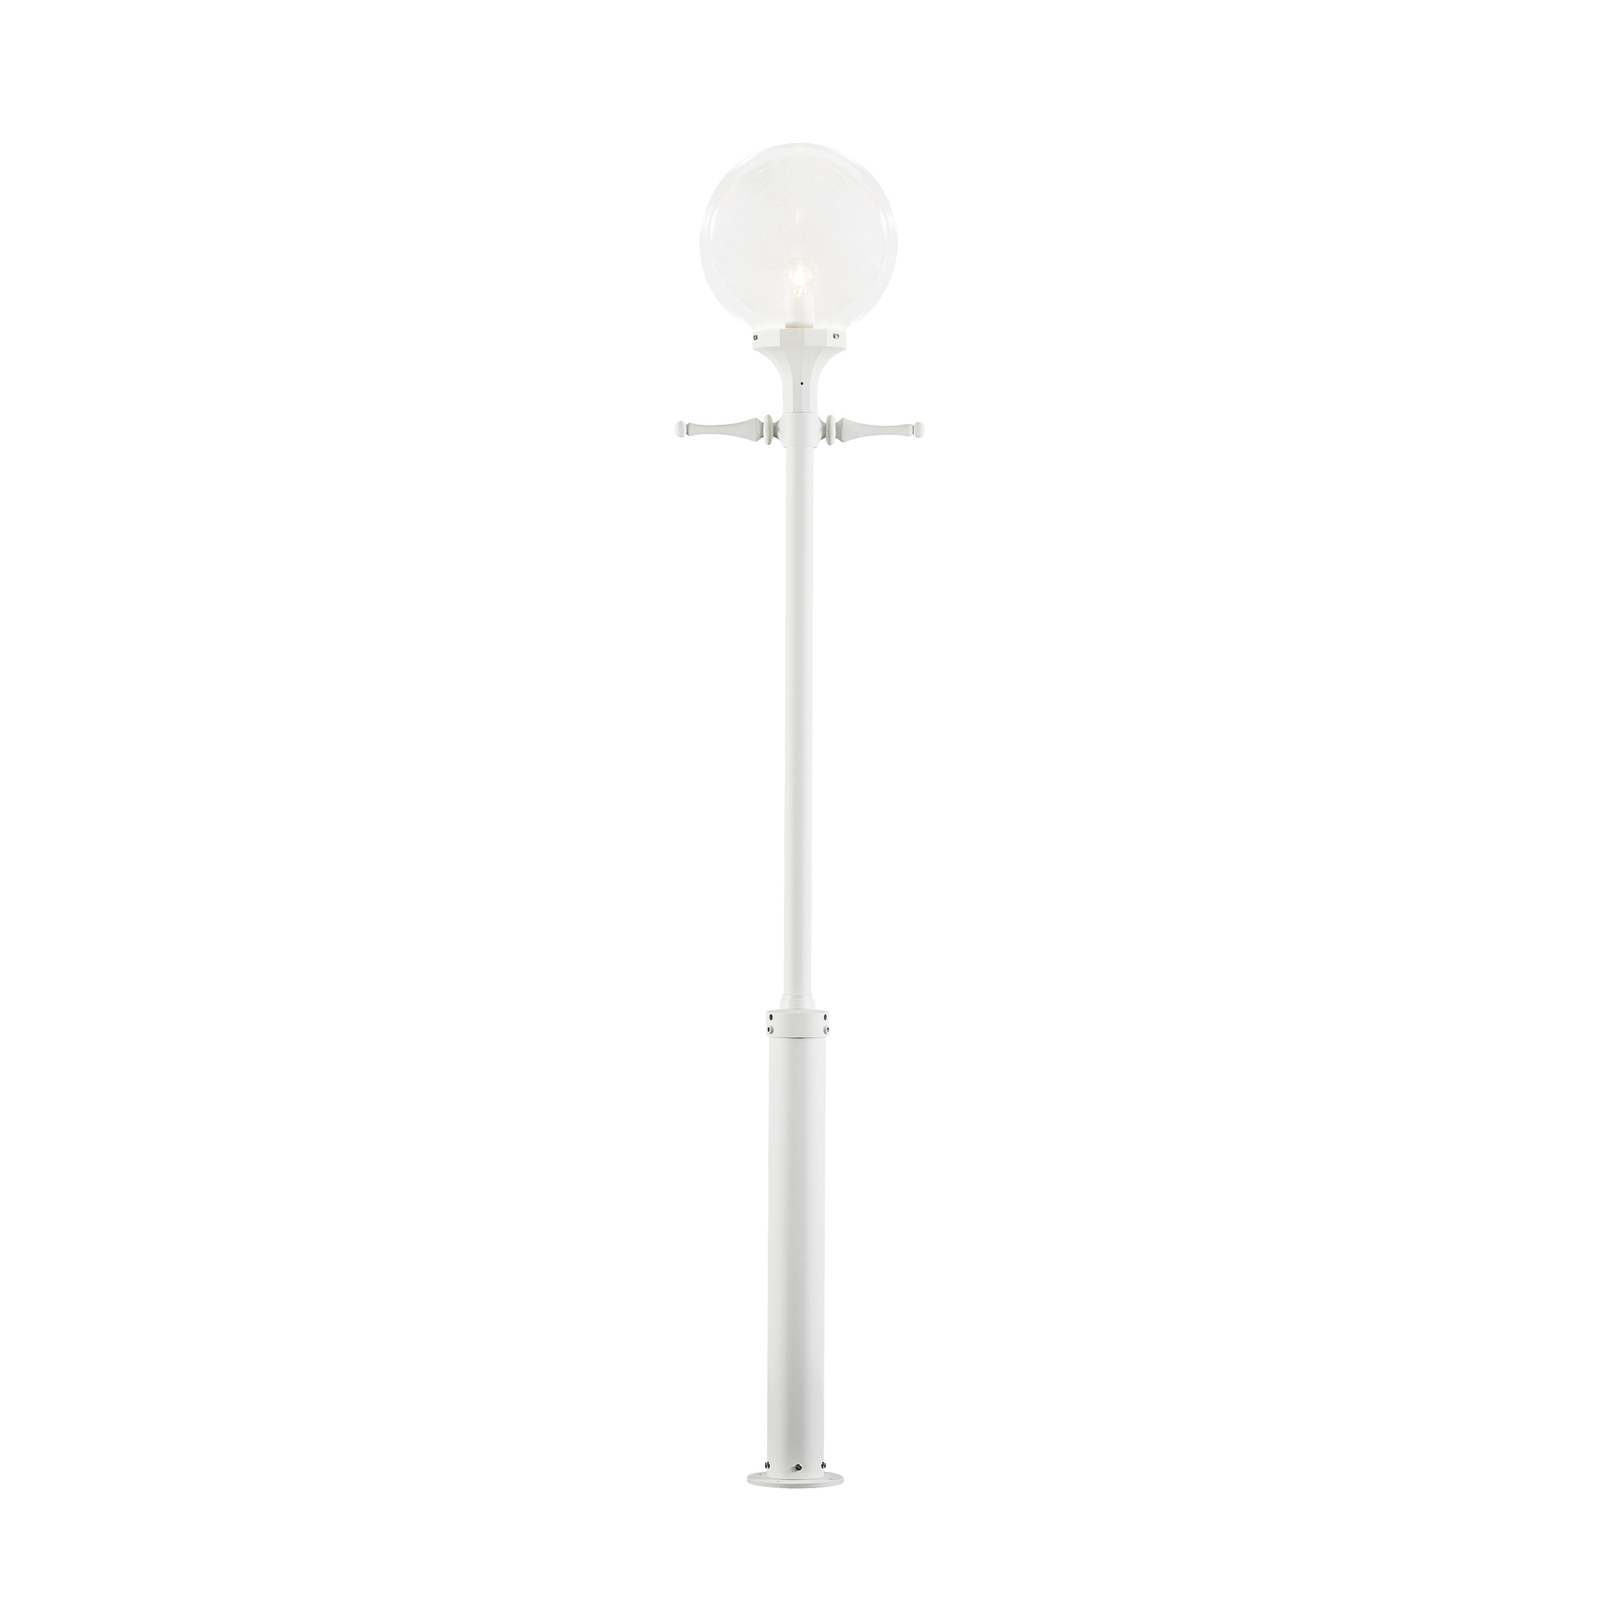 Orion lamp post, white, clear spherical lampshade